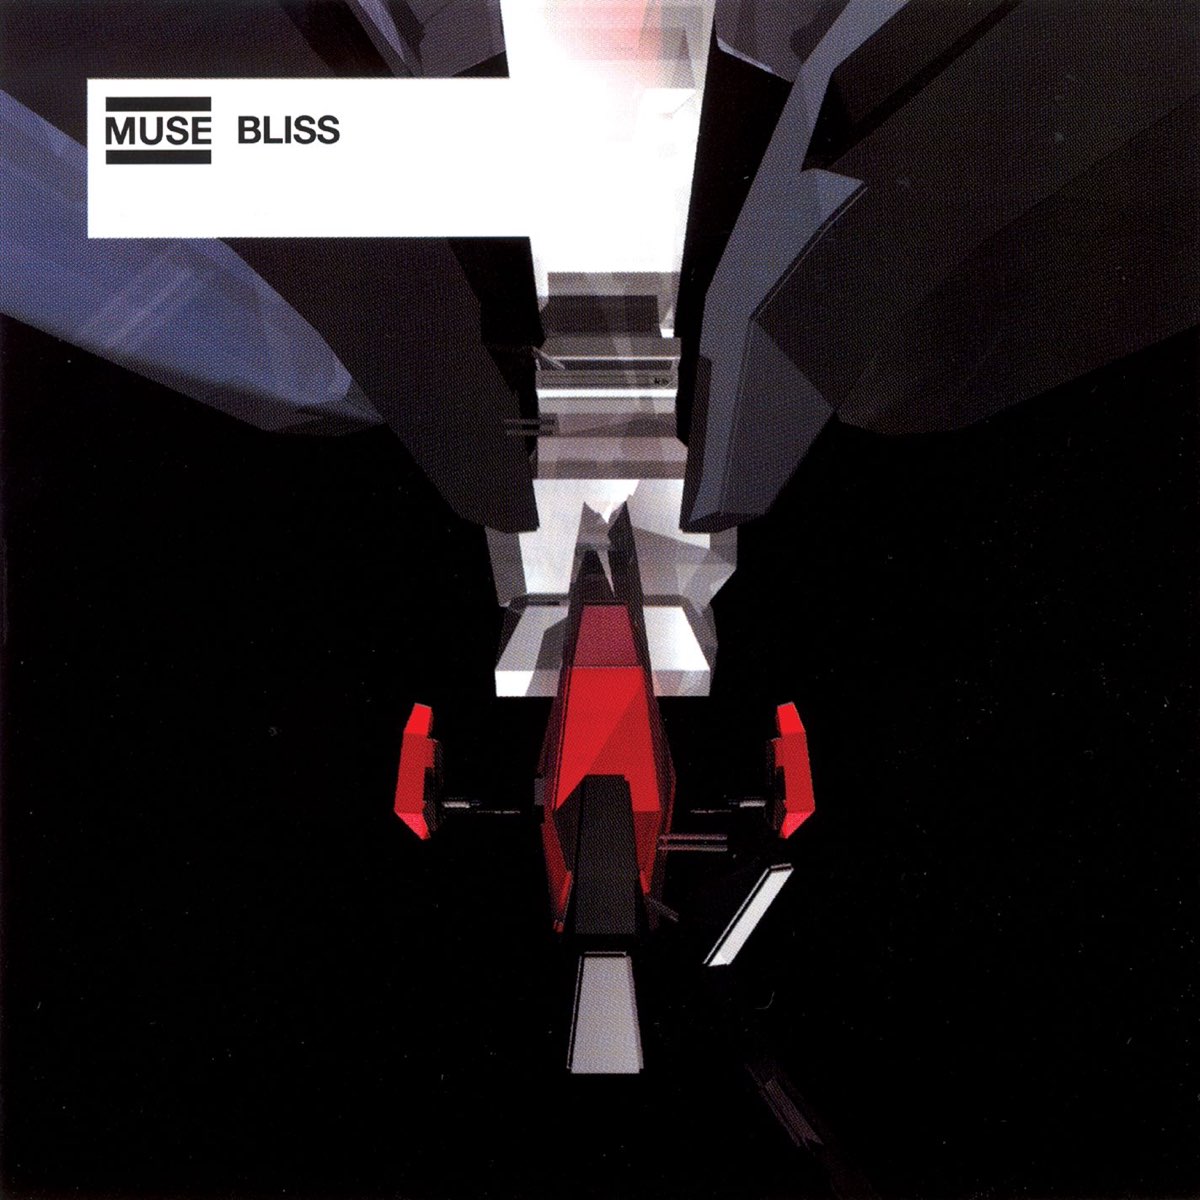 Muse Bliss cover artwork